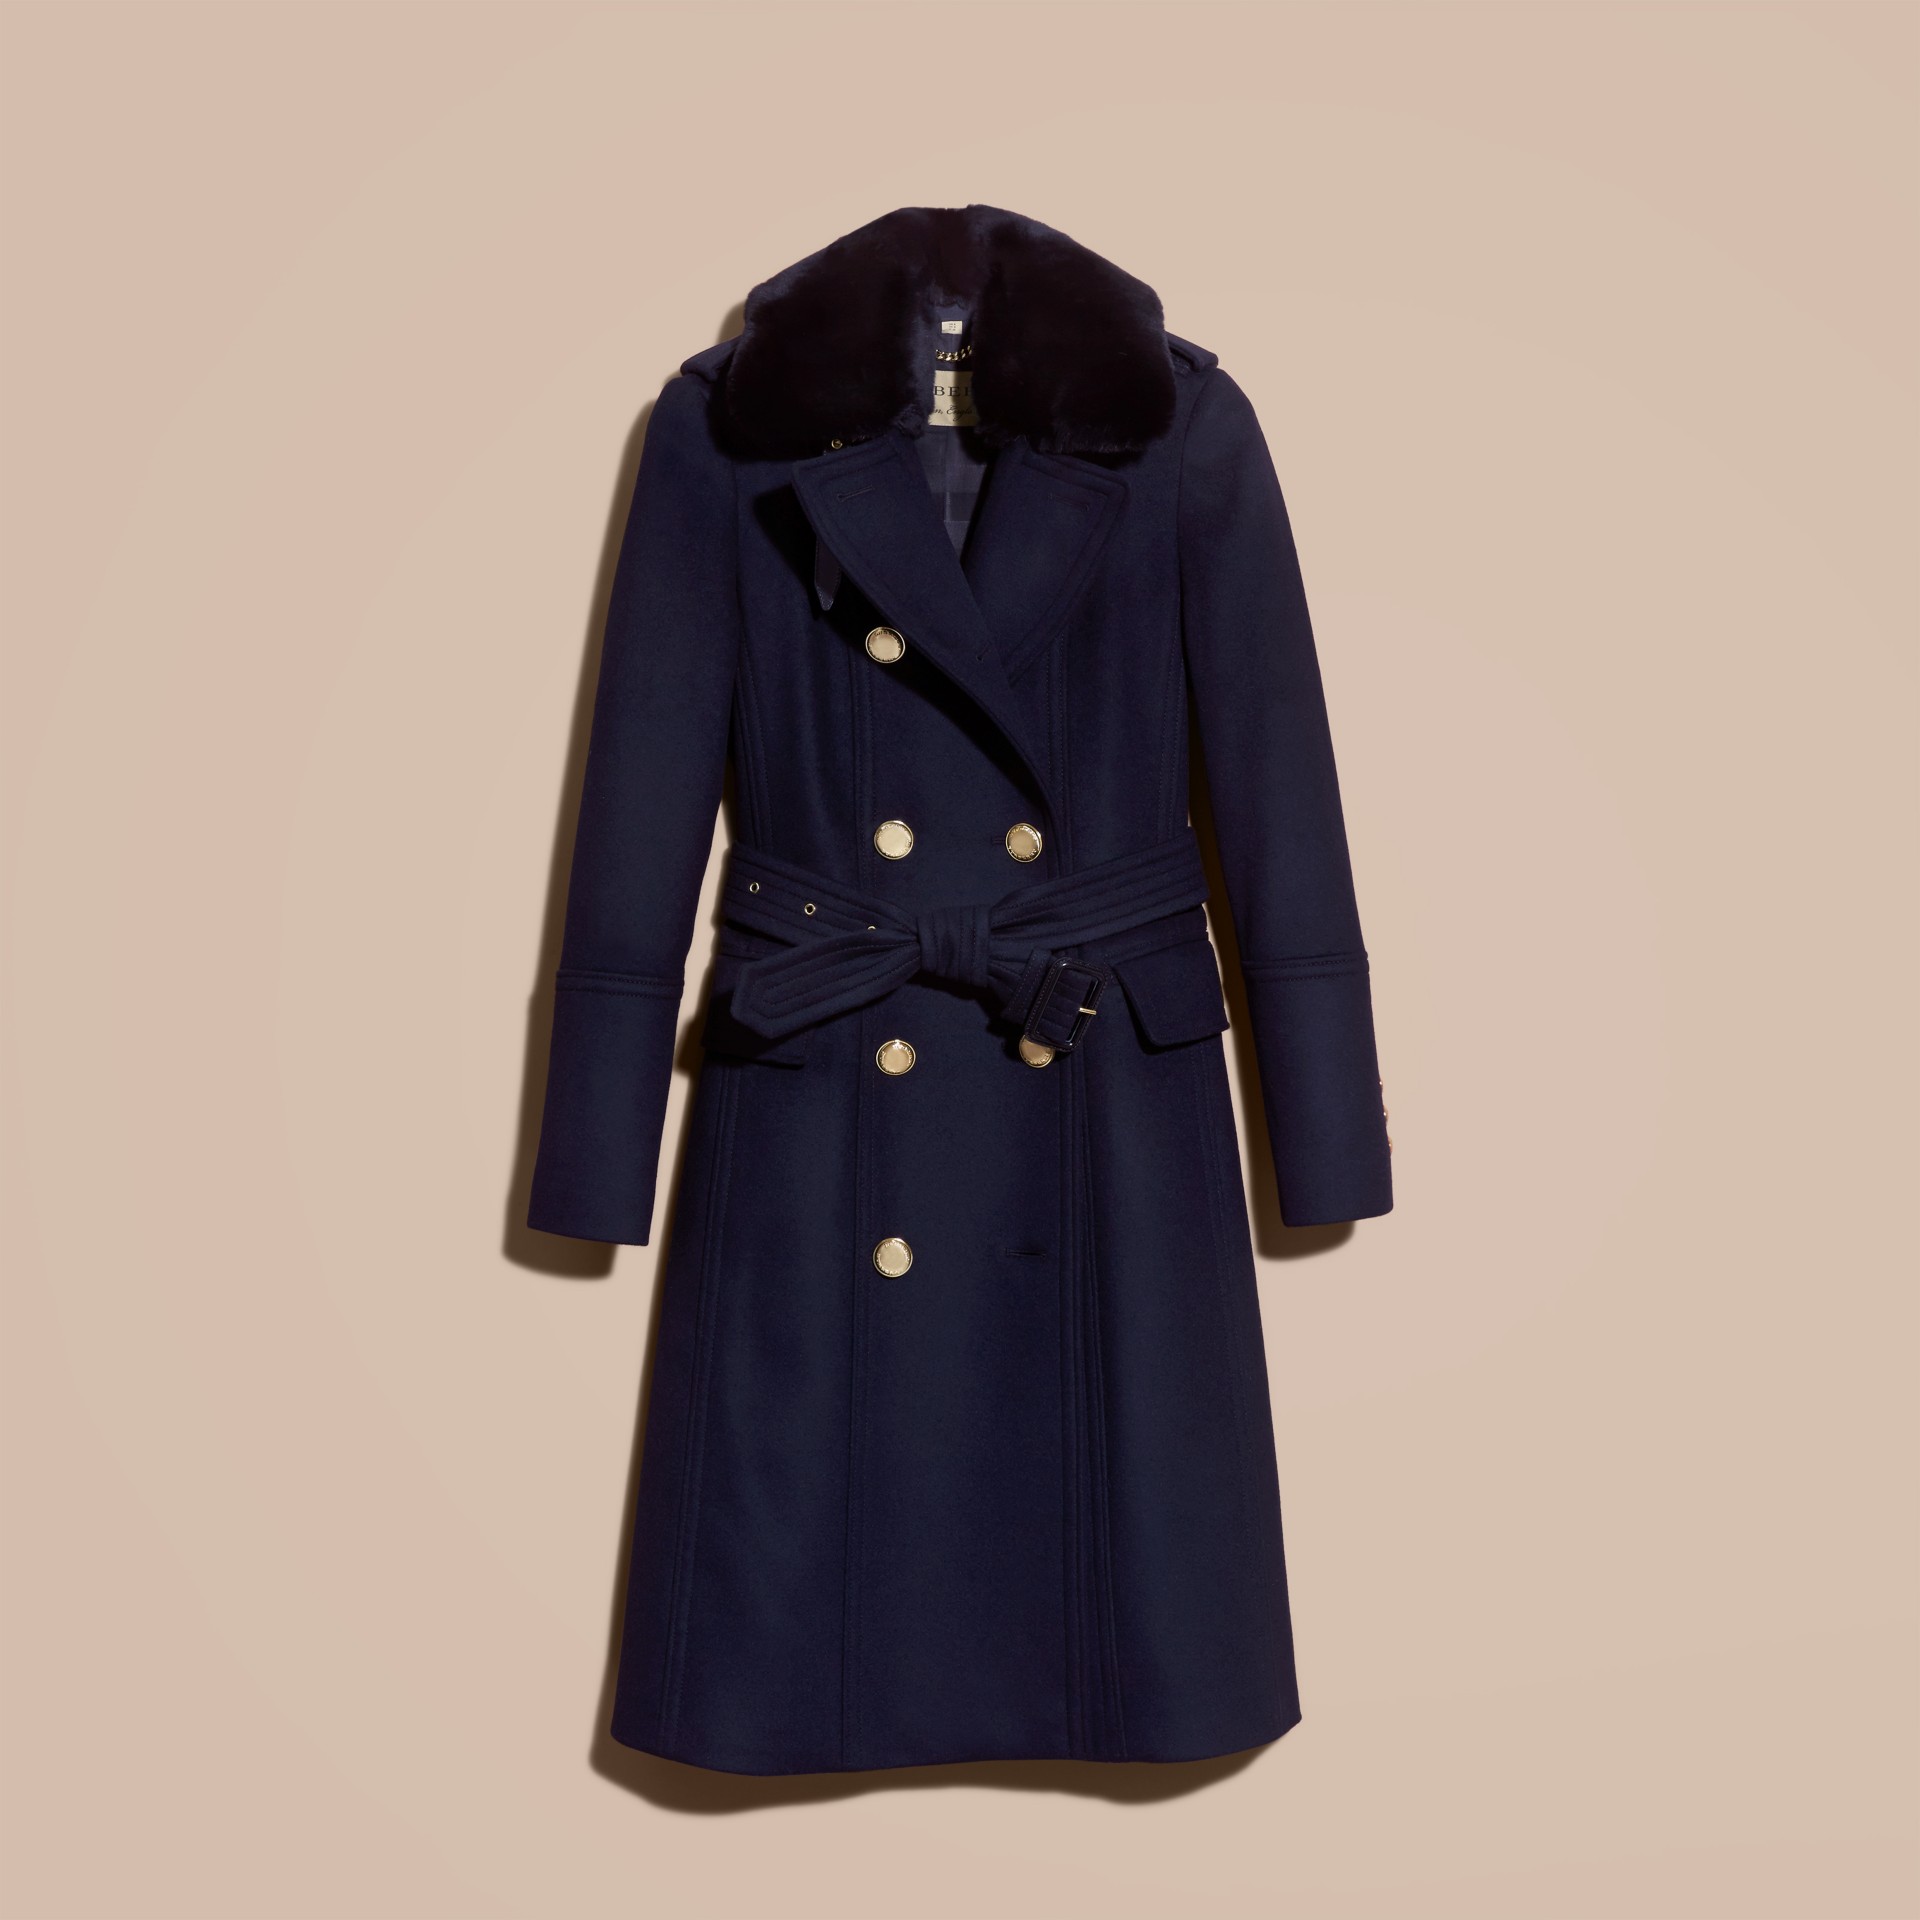 Wool Cashmere Trench Coat with Detachable Fur Collar in Navy - Women ...